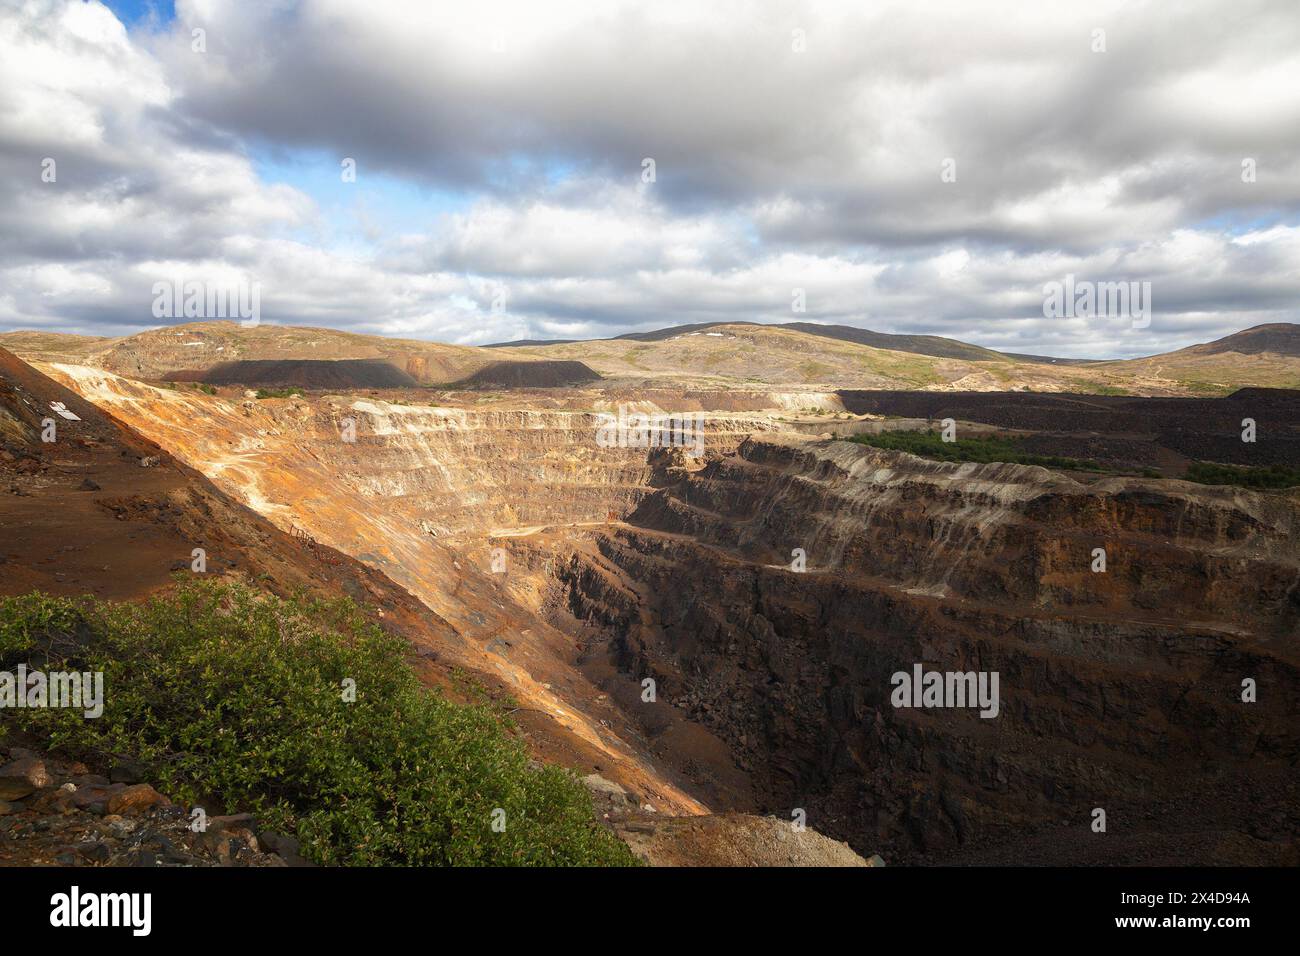 Large quarry for copper and nickel mining. Russia, Murmansk region. Top view Stock Photo